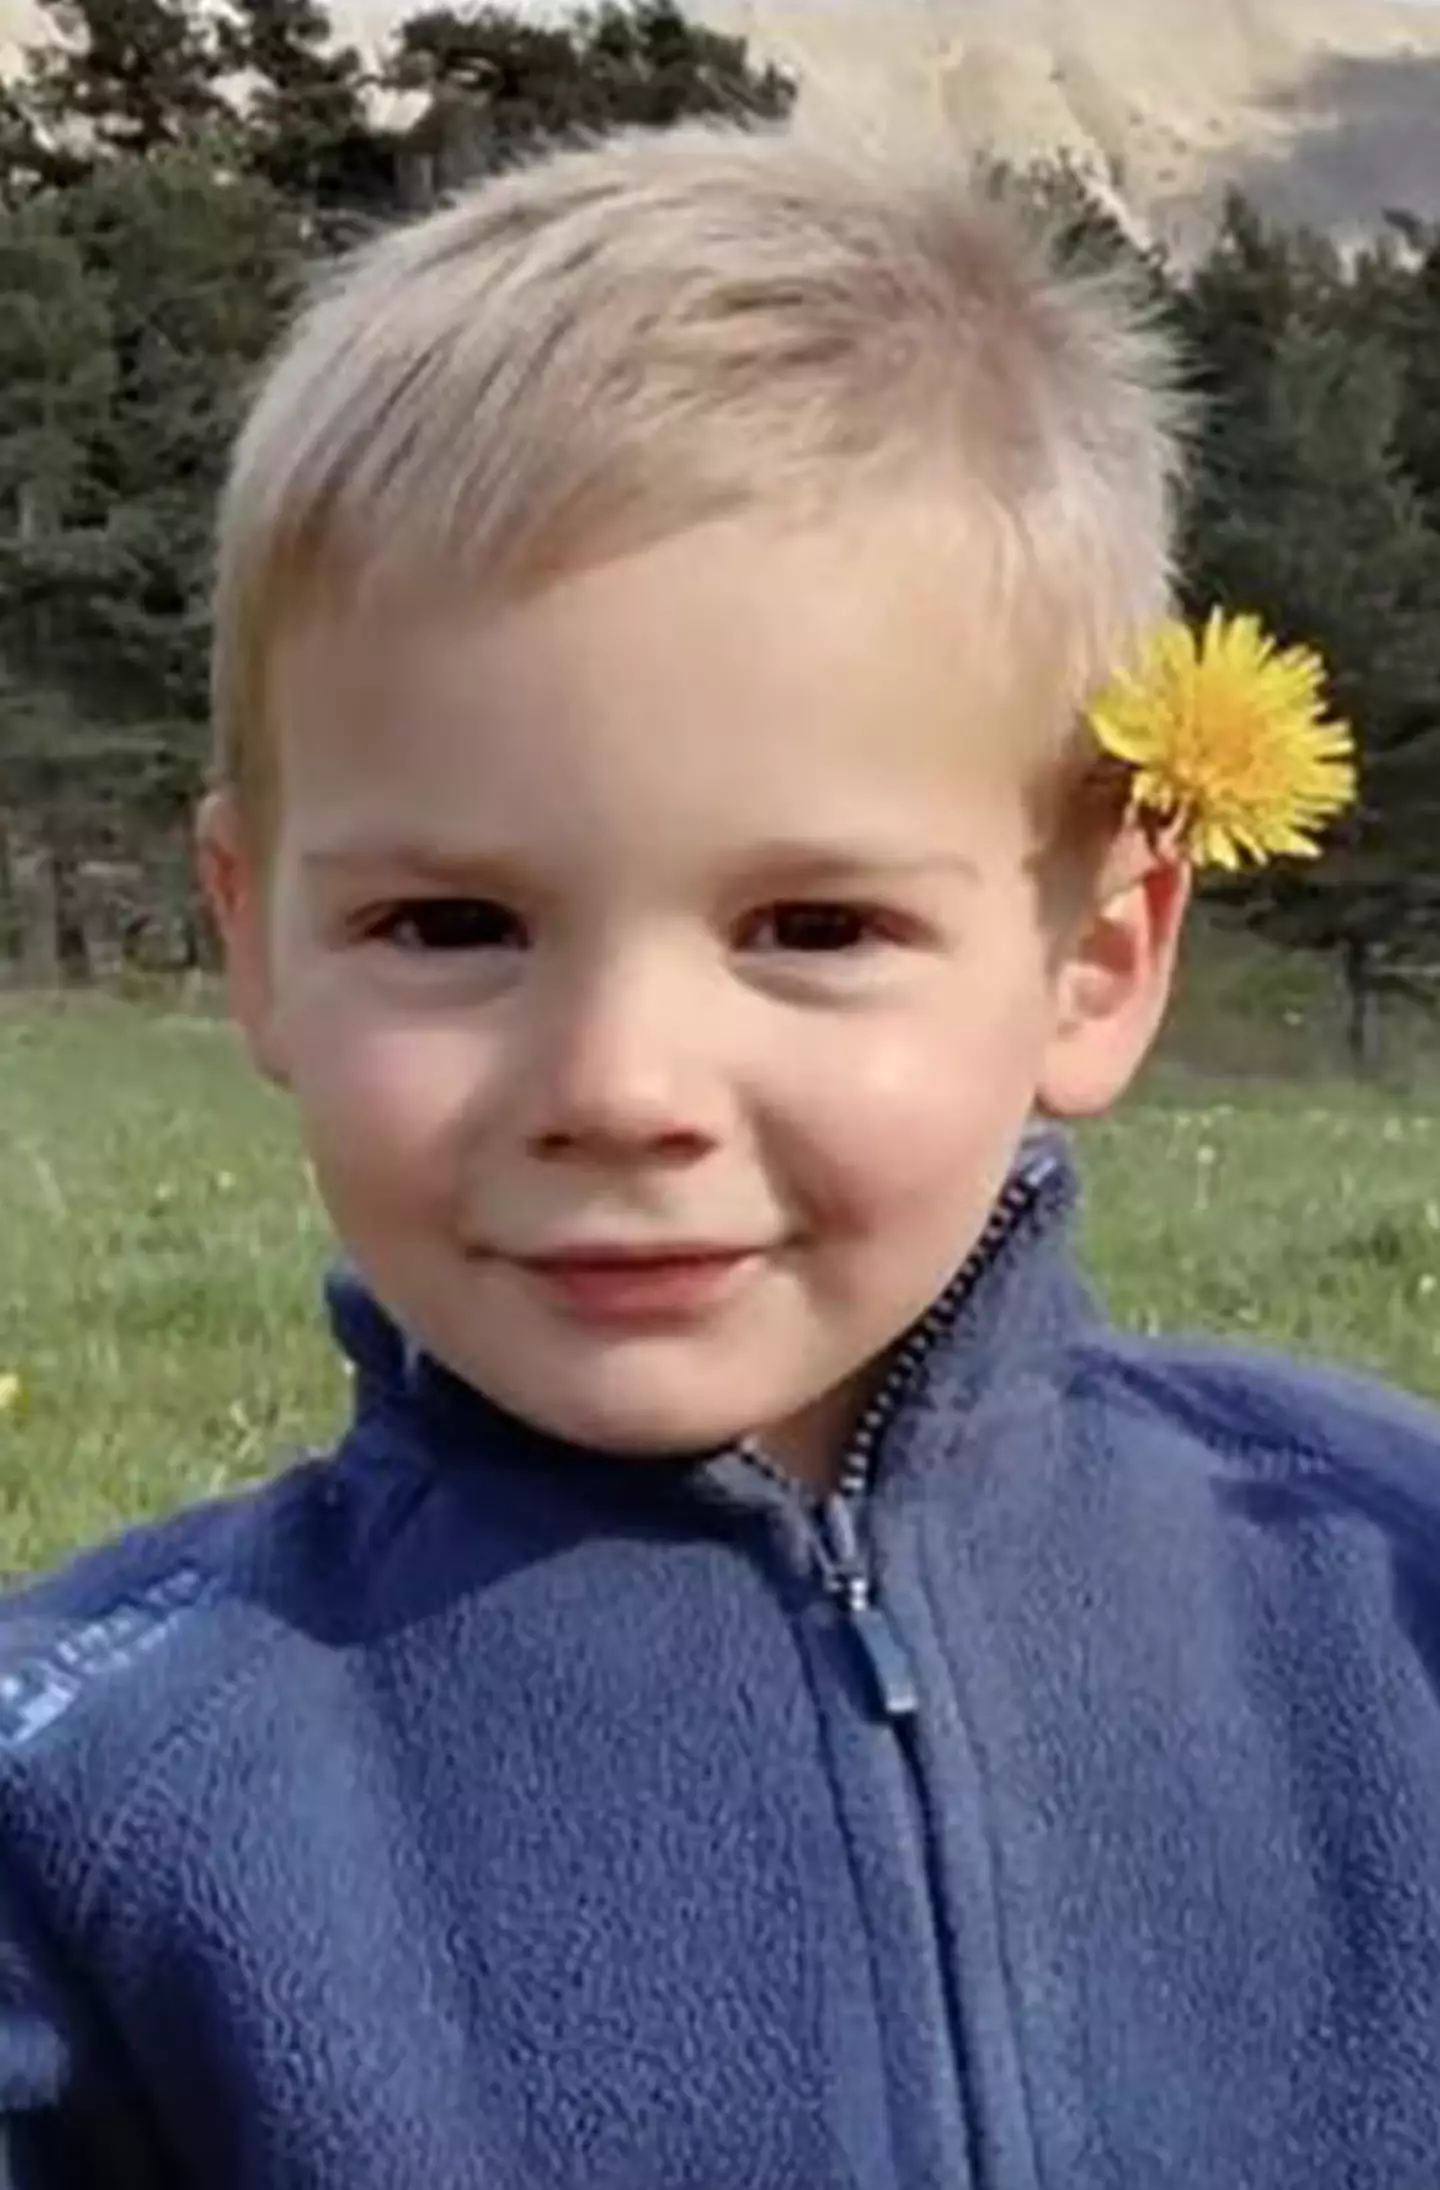 Emile Soleil disappeared from his grandparents' holiday home in Haur-Vernet.